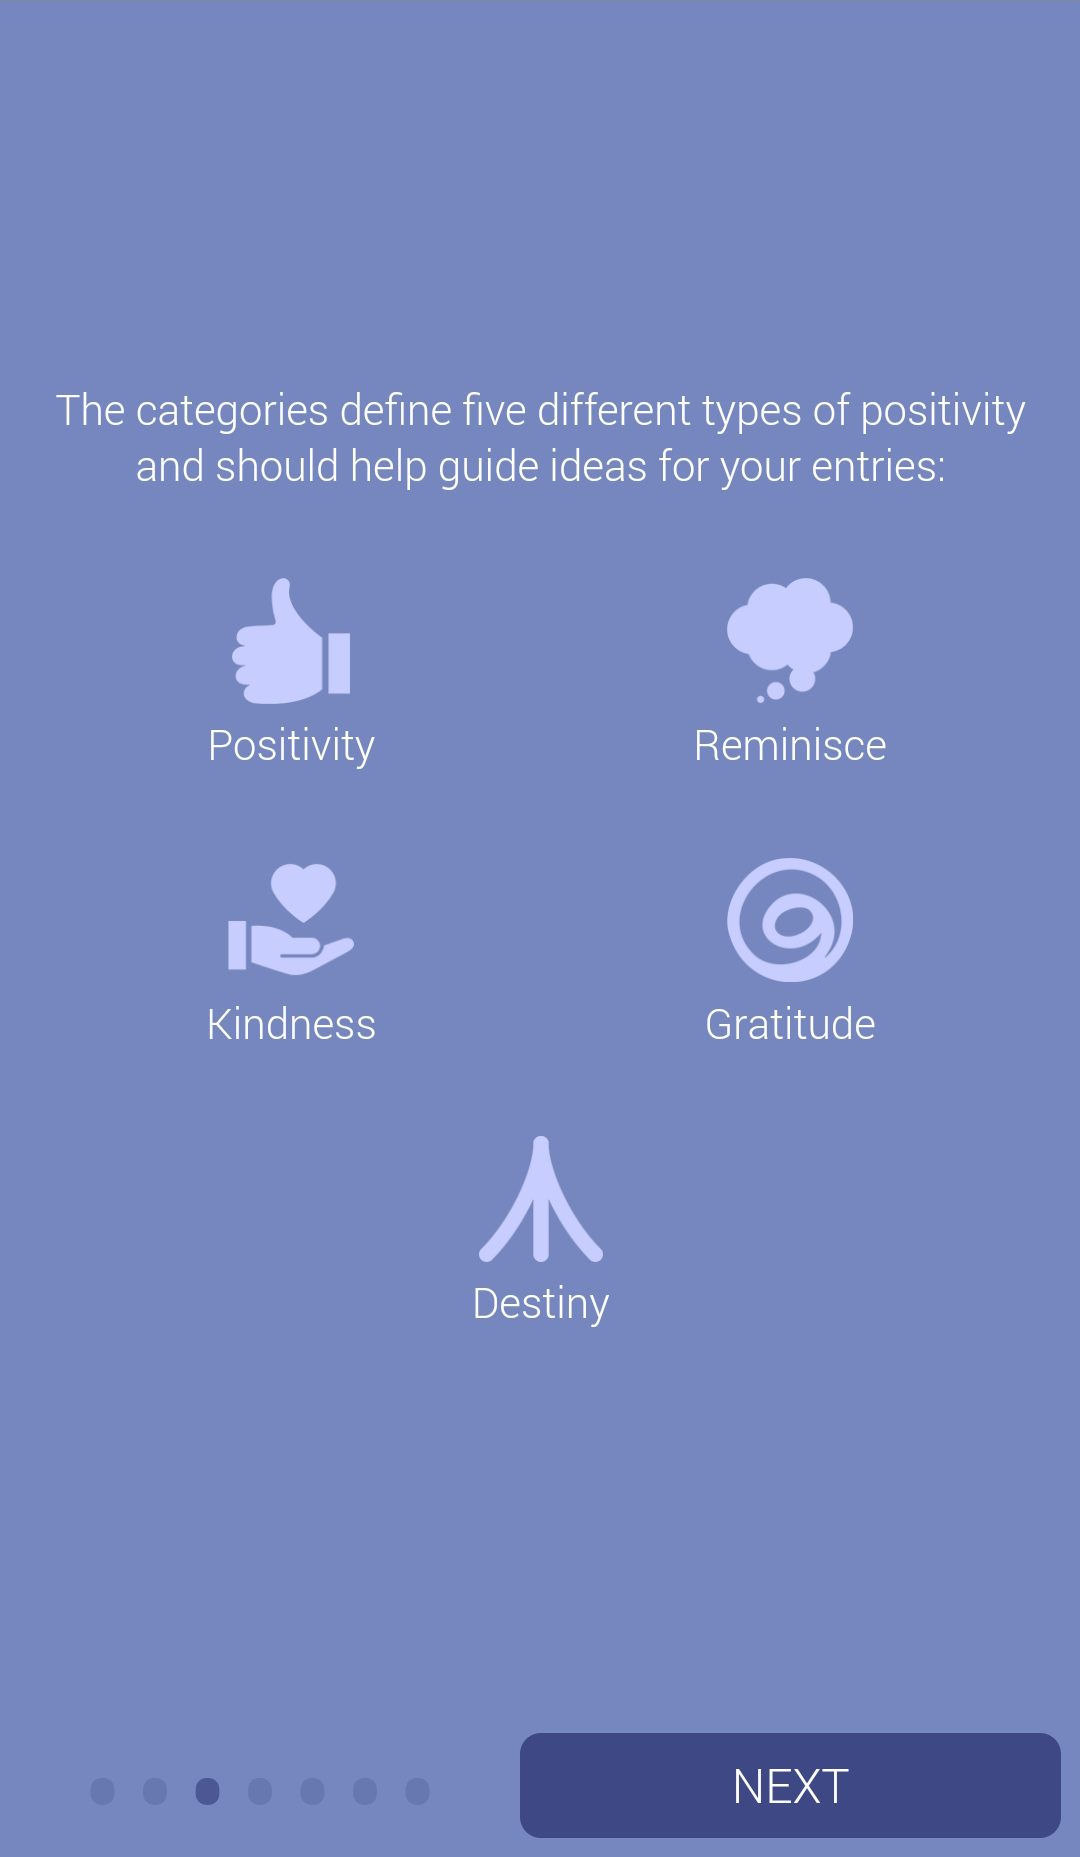 Onboarding screen with text: 'The categories define five different types of positivity and should help guide ideas for your entries: Positivity, Reminisce, Kindness, Gratitude, Destiny'.